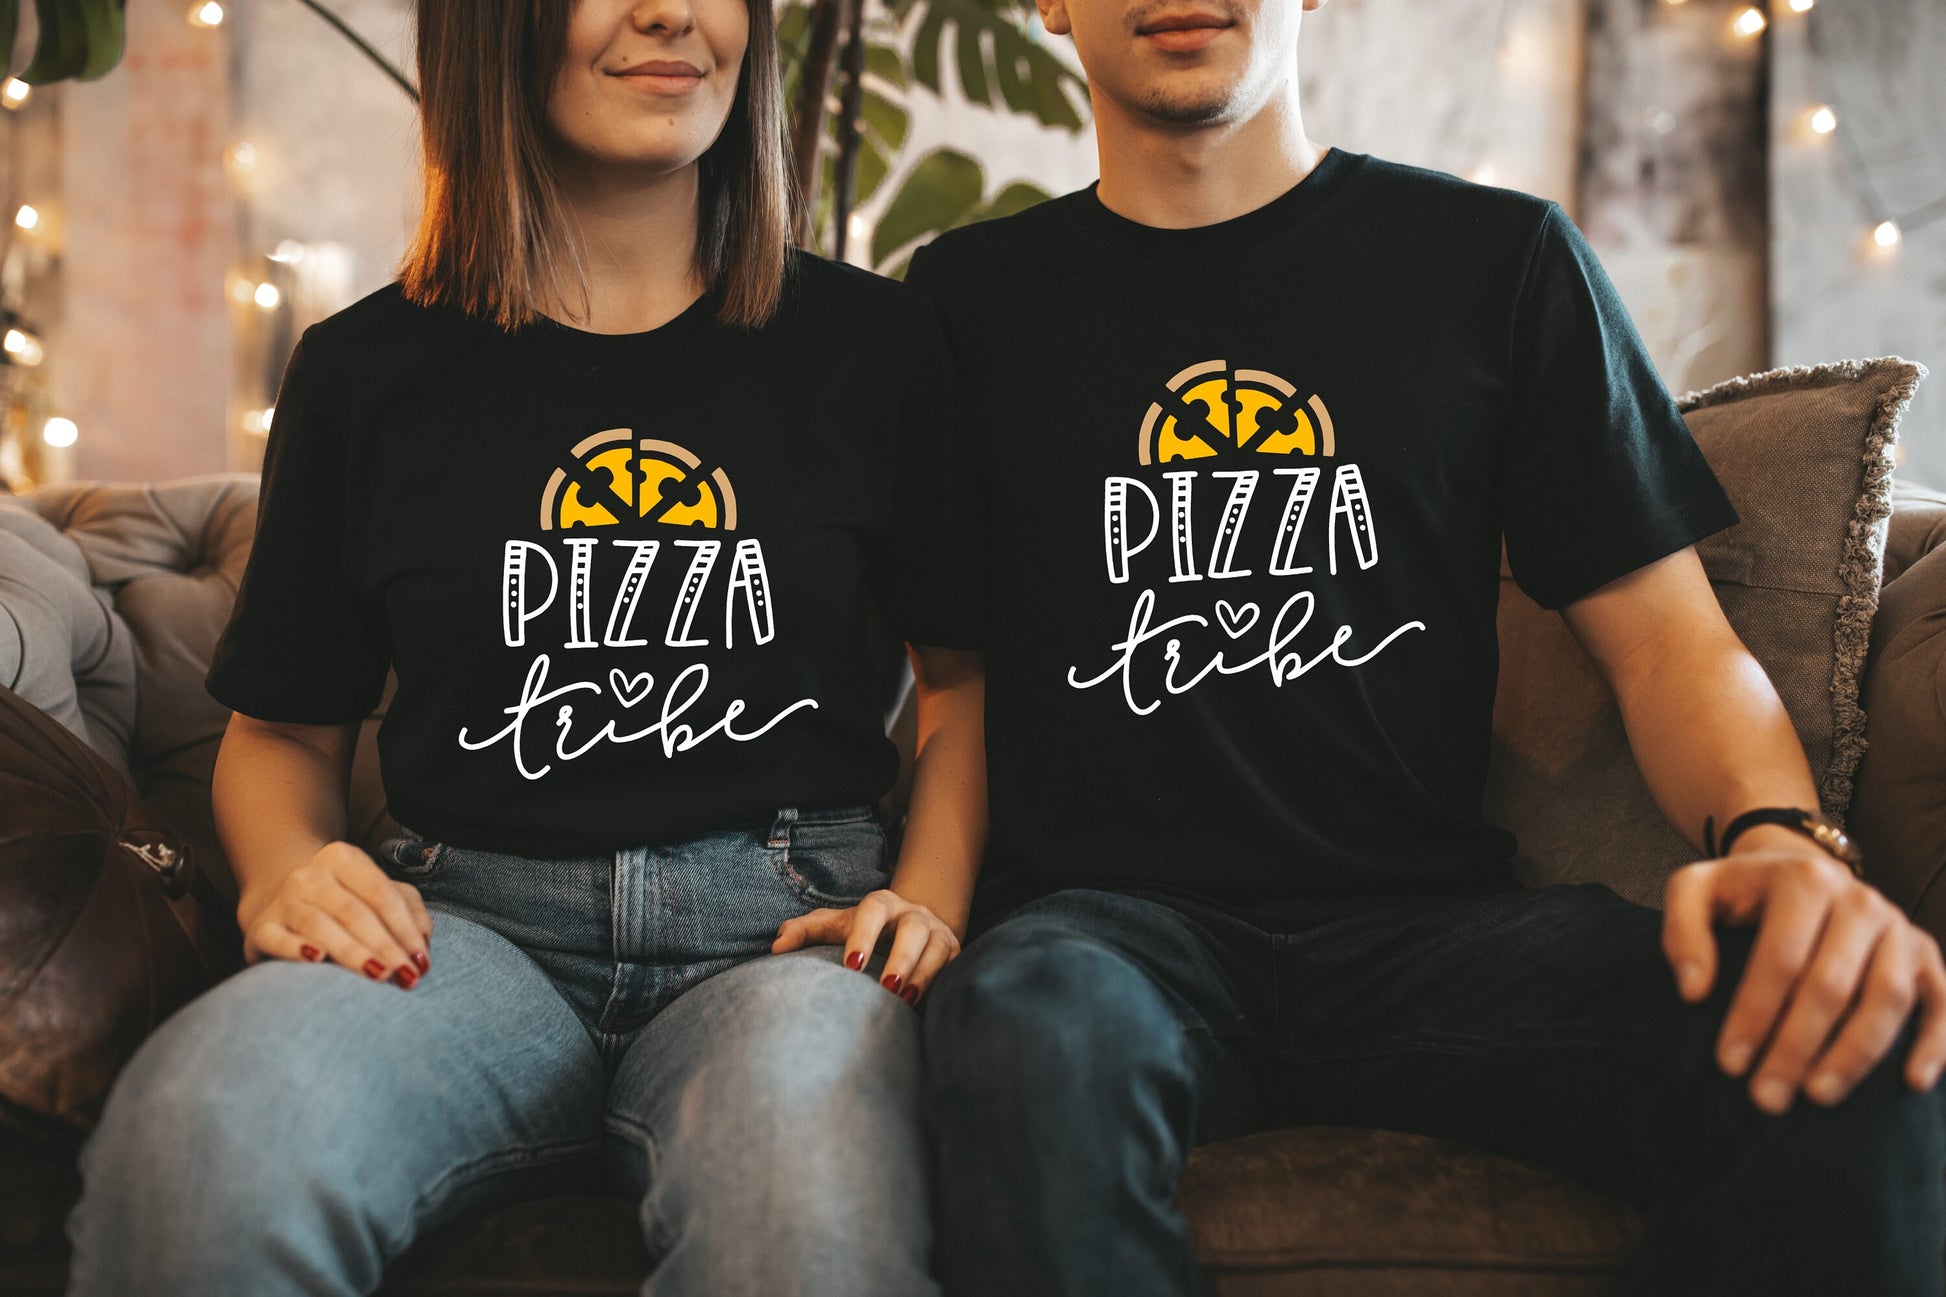 Pizza Tribe Shirt - baby, kids and adult sizes, matching shirts, pizza shirts, matching couple shirts, matching family shirts, pizza party